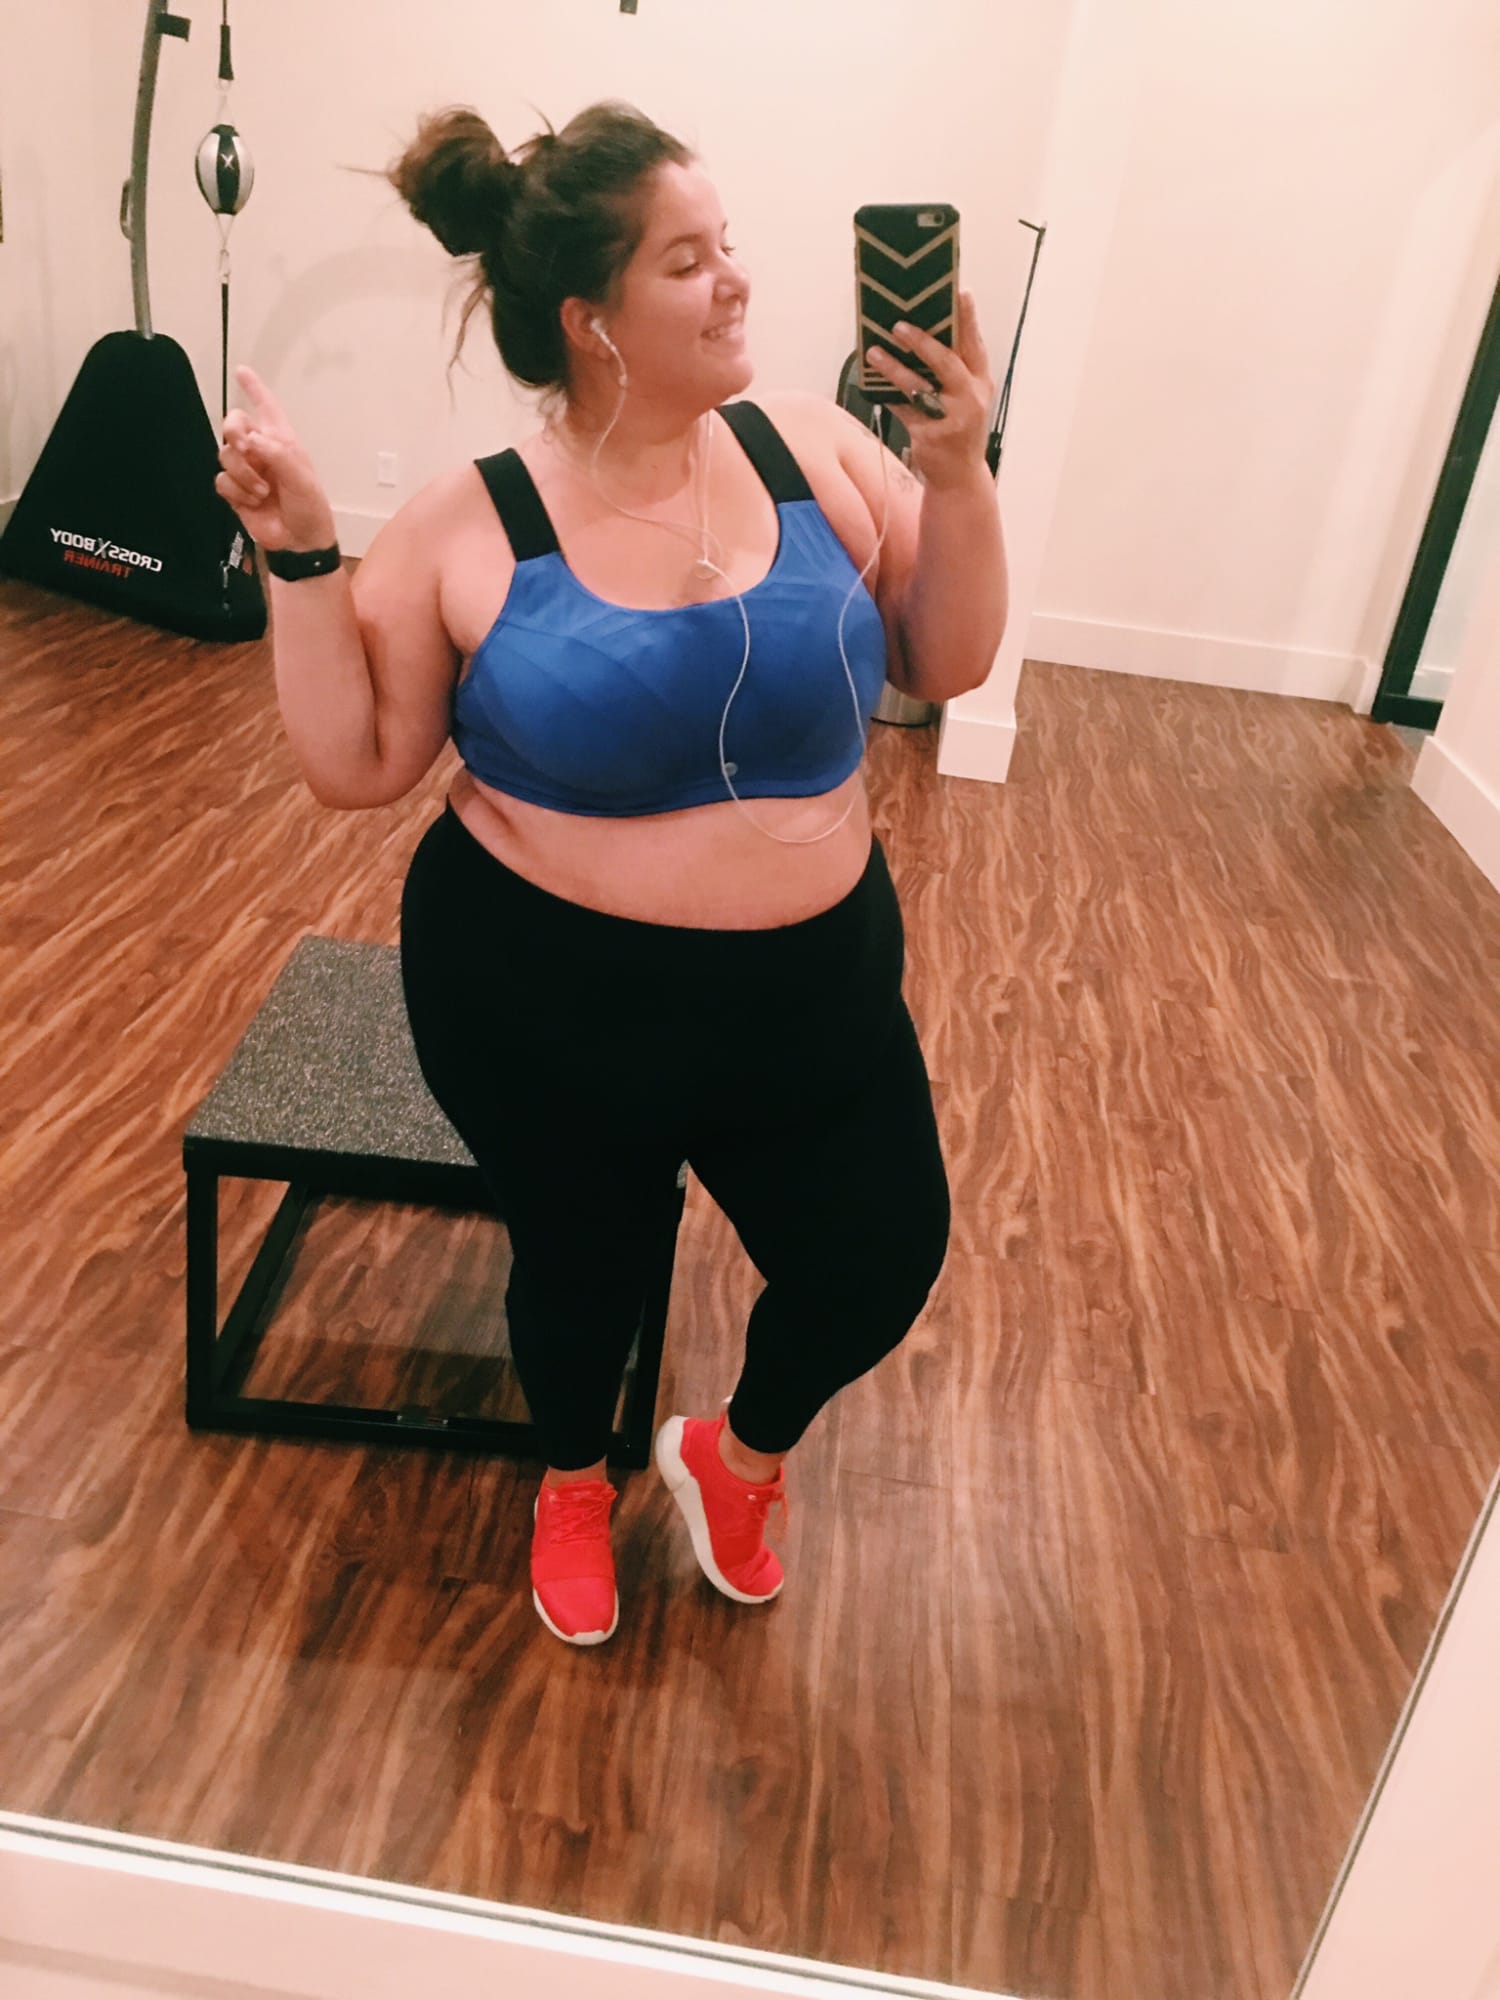 Plus-size woman sent death threats for her weight spreads self